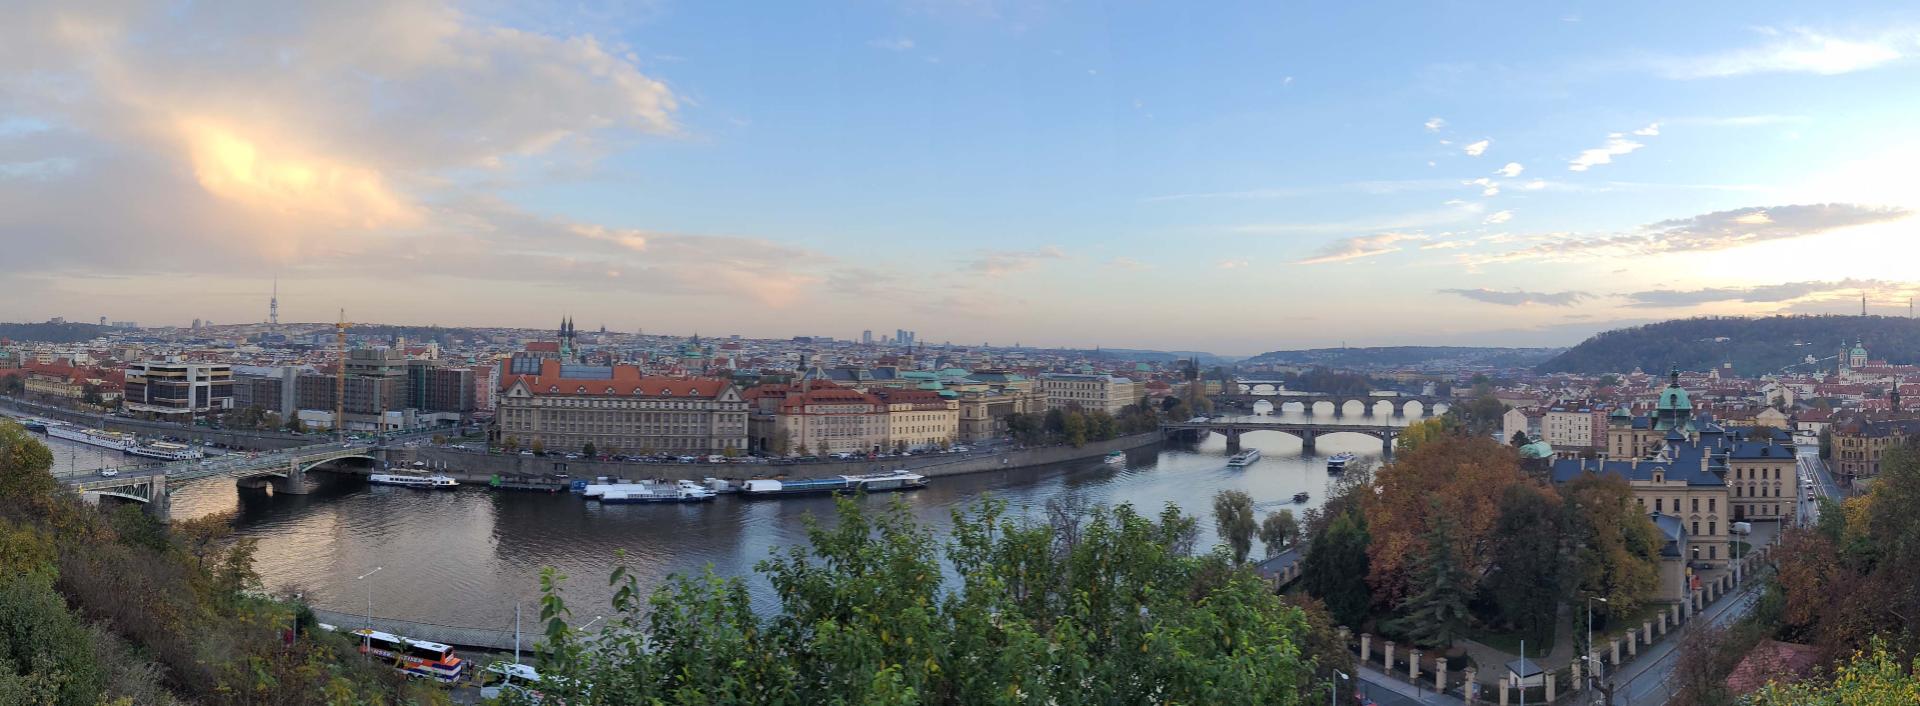 What to see in Prague in 2-3 days?